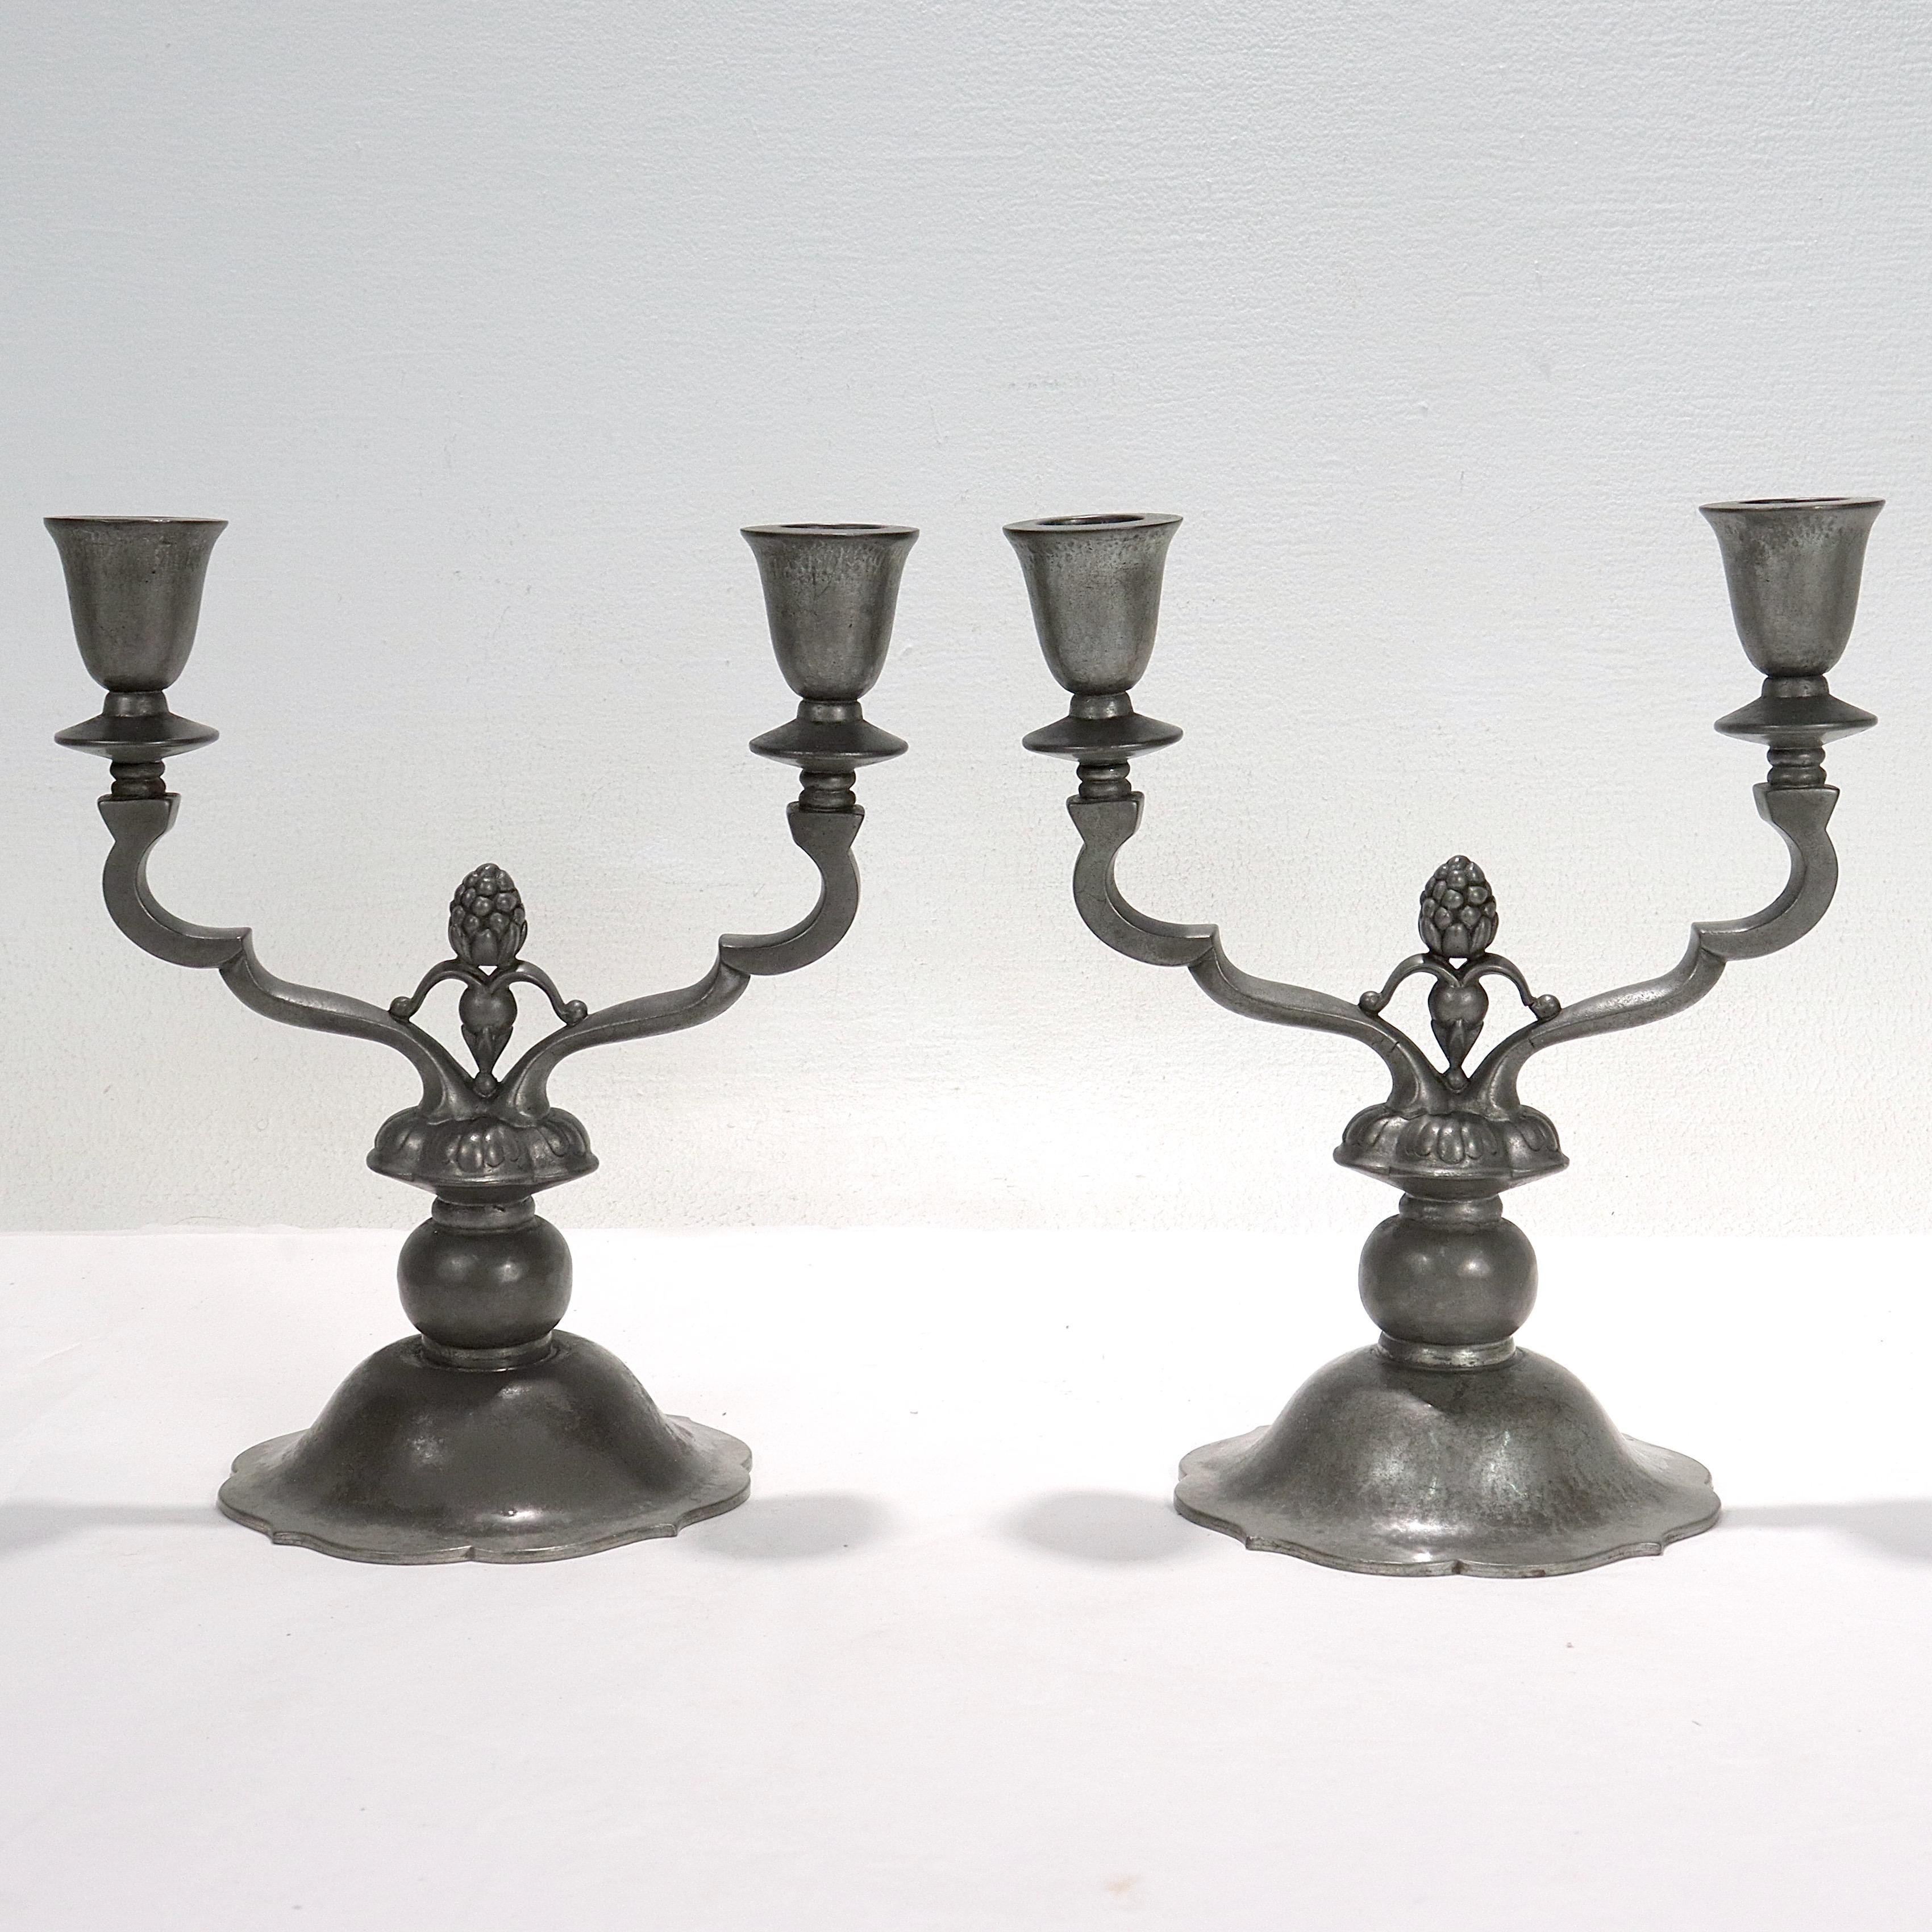 A fine pair of antique pewter candlesticks or candelabra.

By Just Andersen.

Dessin (design) #307.

Each with a beautiful patina throughout.

Marked to the base of each with Denmark /Just Andersen's maker's mark / 1929 / 307.

Simply a great pair